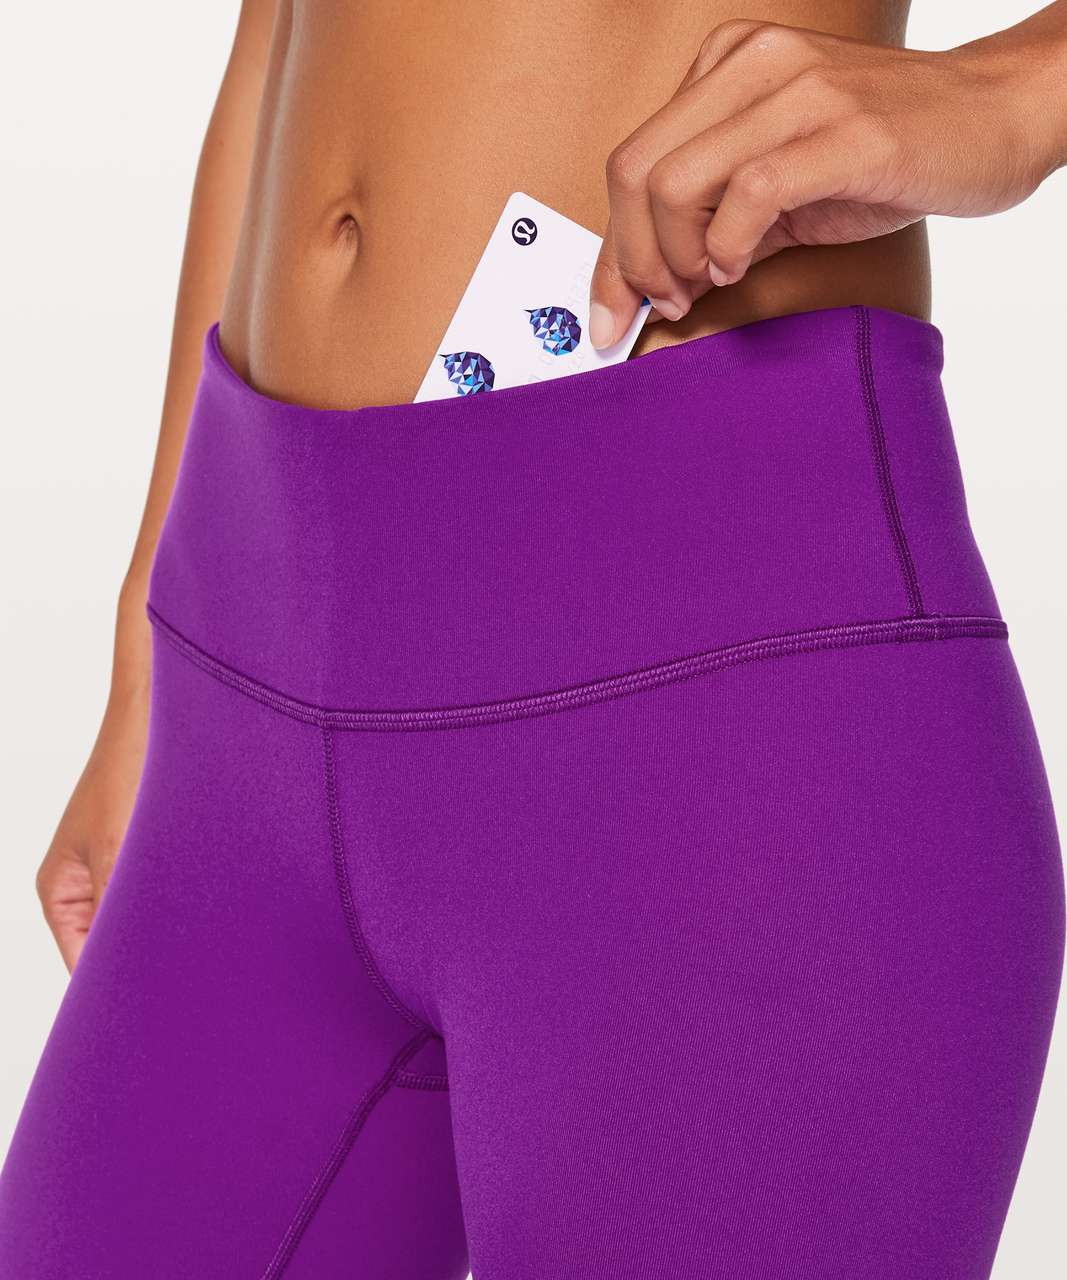 Lululemon Ultra Violet 6 Zone In Tight Purple - $45 (48% Off Retail